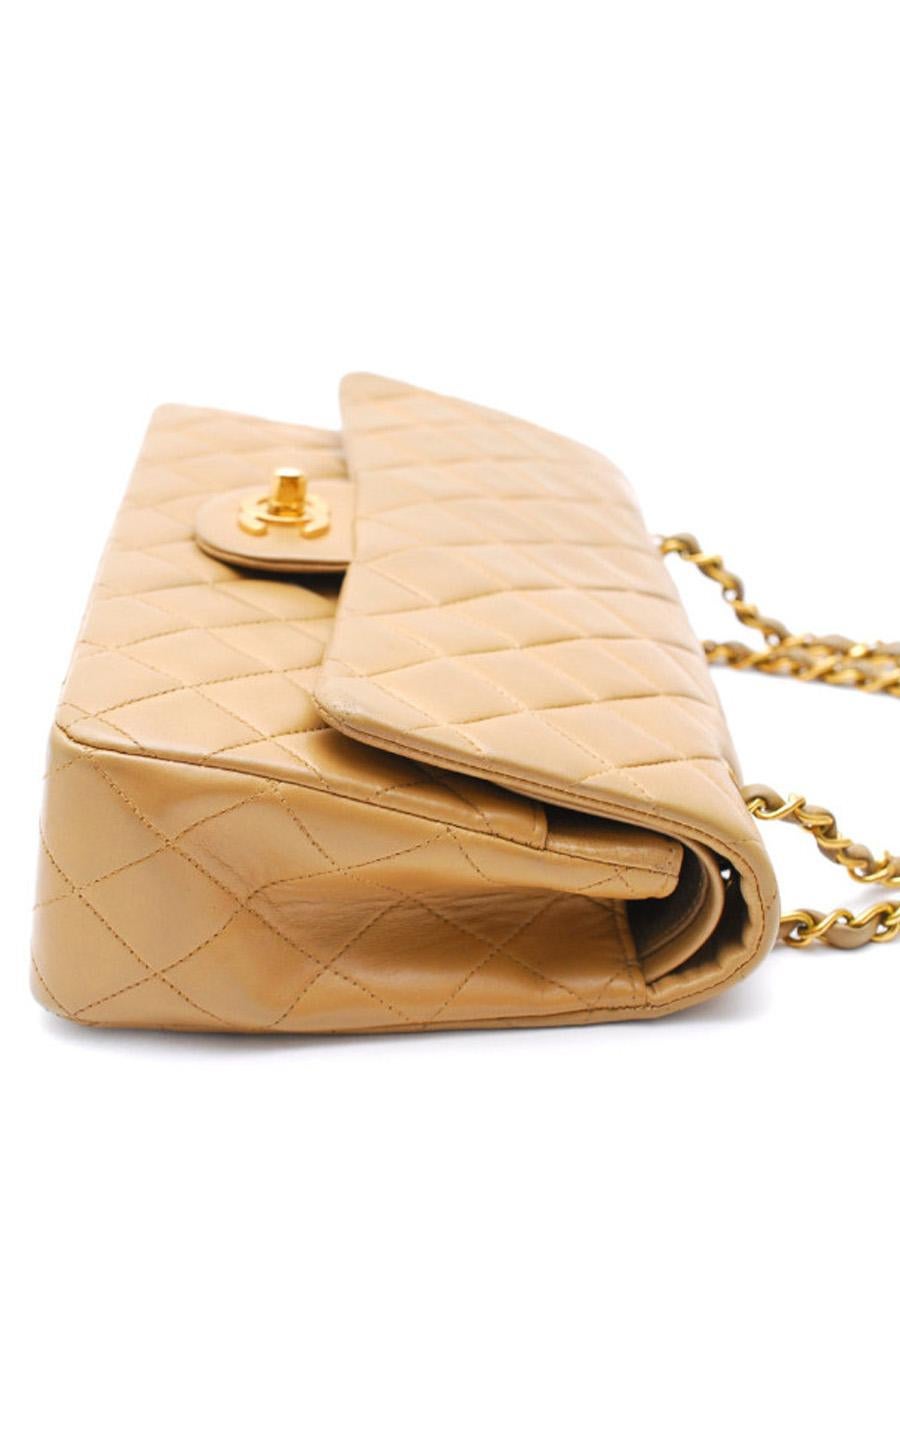 Brown Chanel Timeless handbag in dark beige quilted leather Gold Chain 